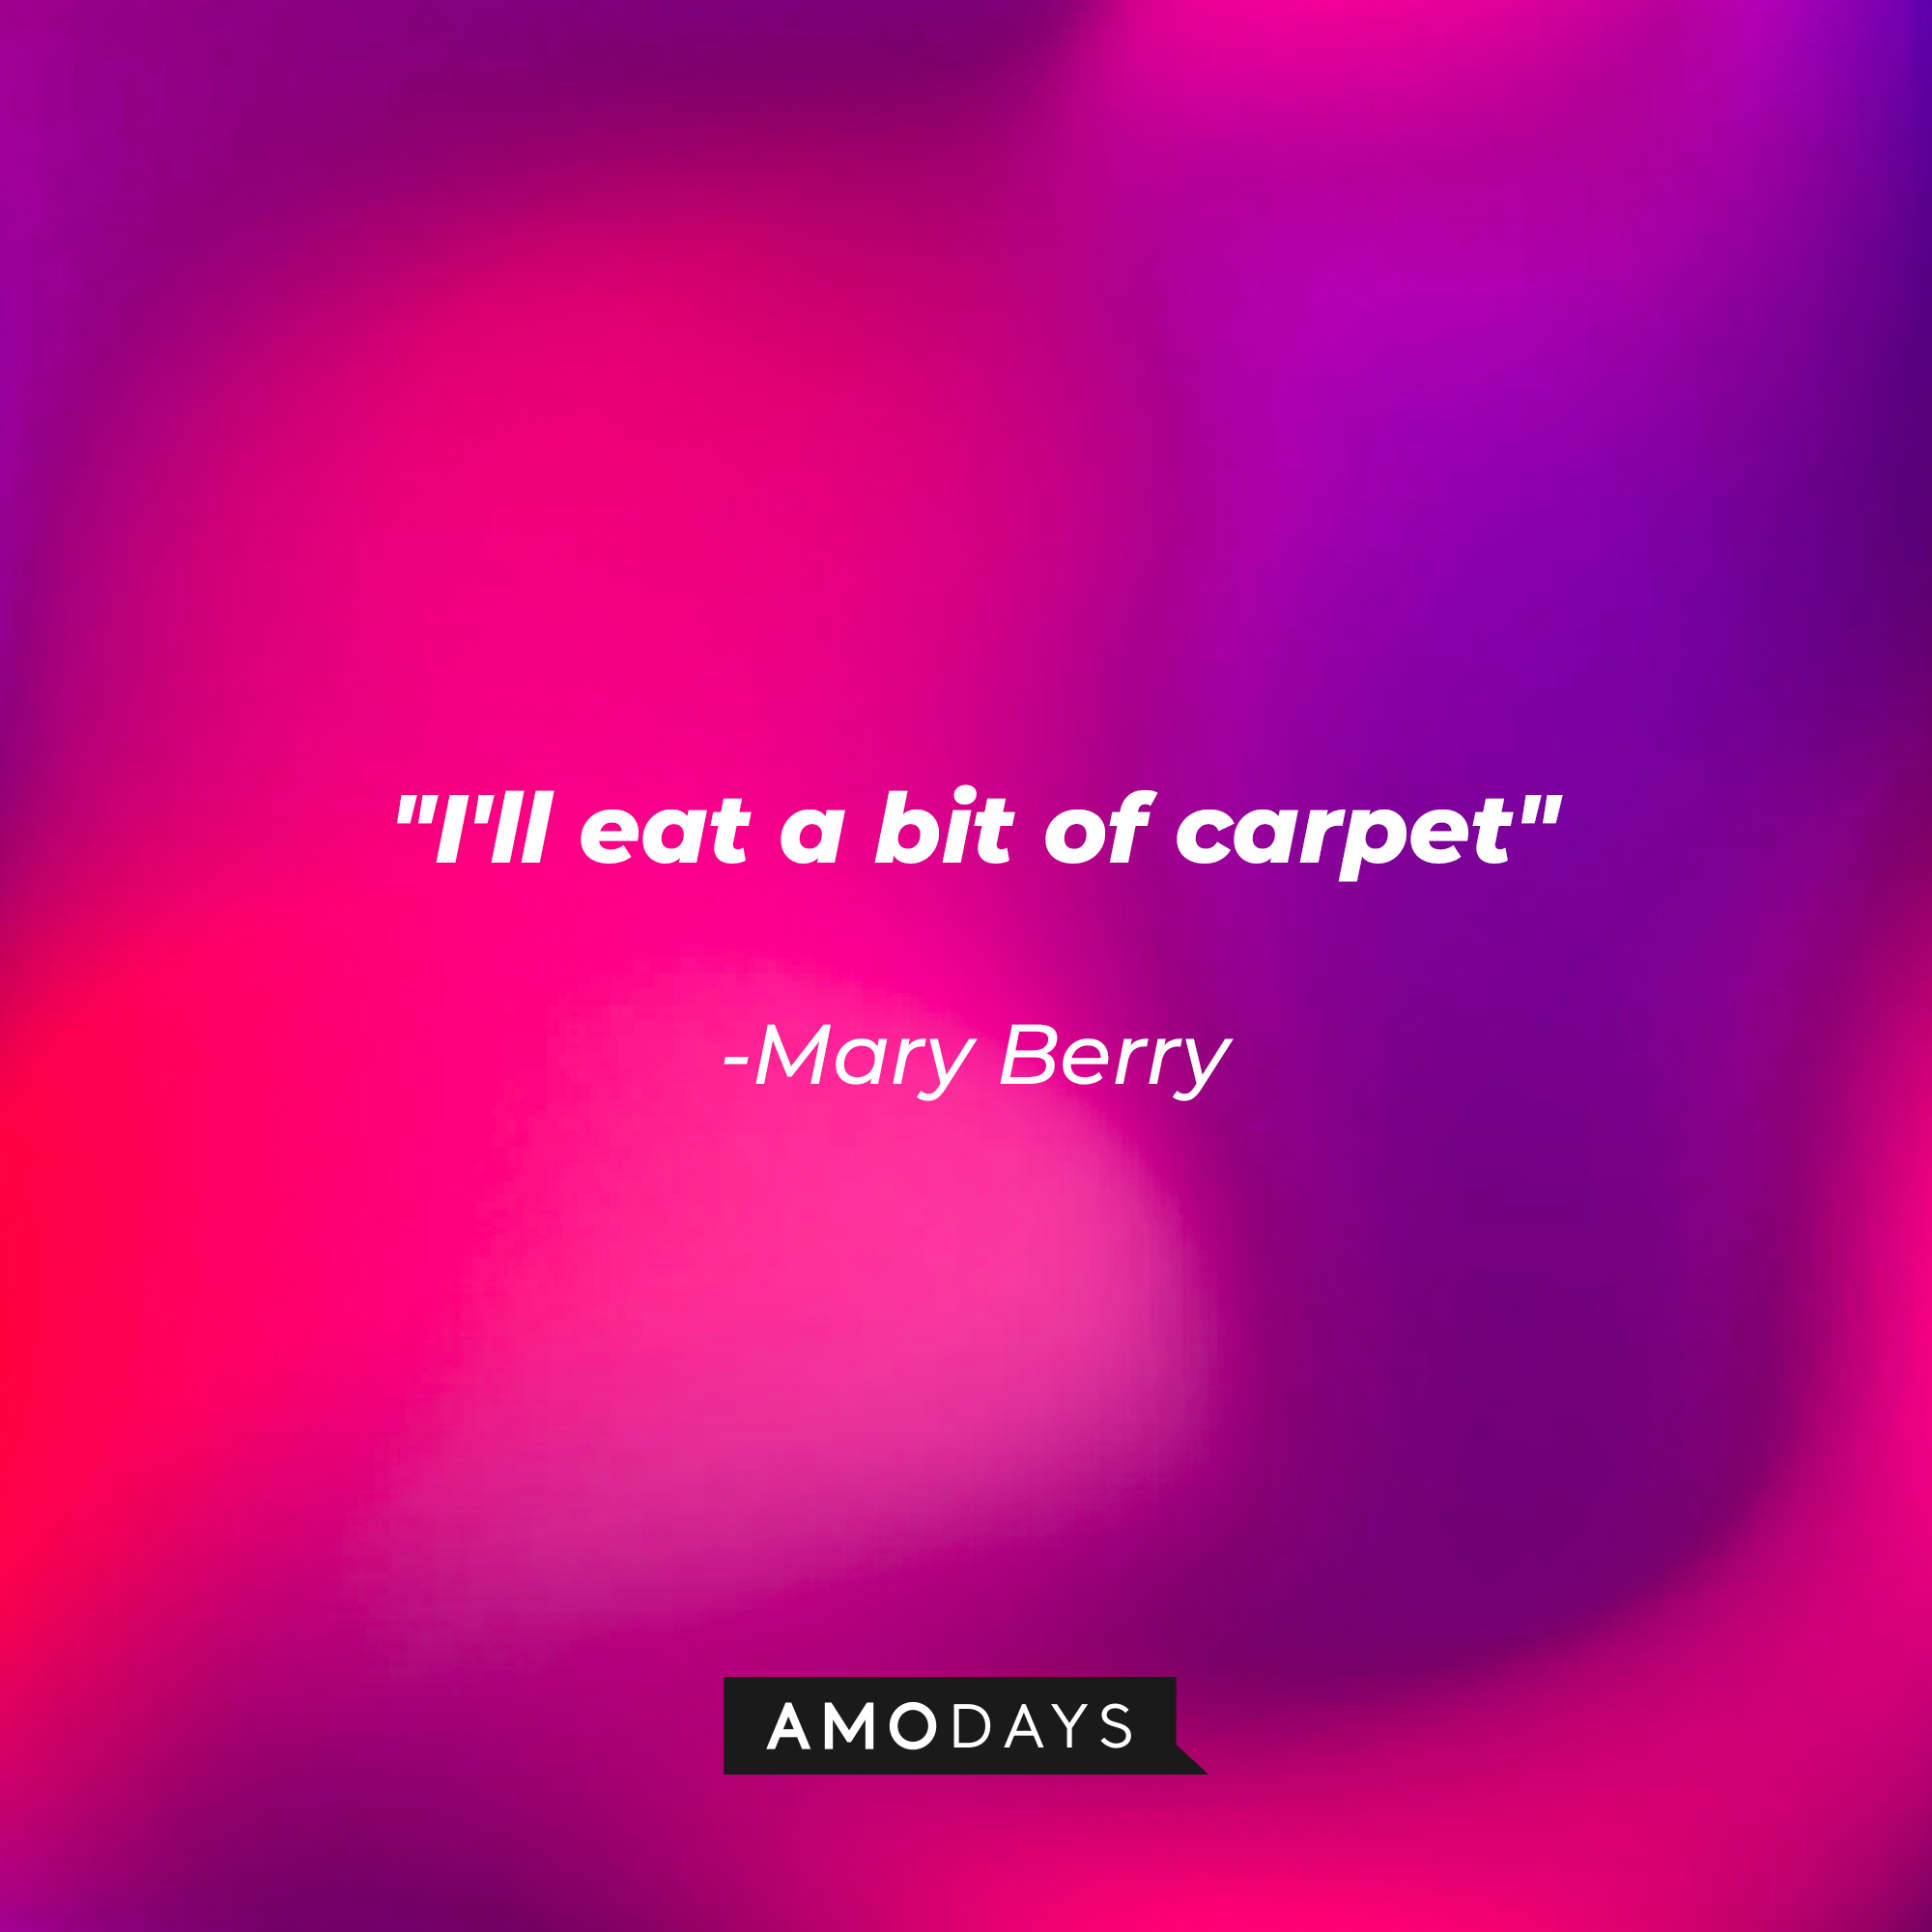 Mary Berry's quote: "I'll eat a bit of carpet." | Image: AmoDays